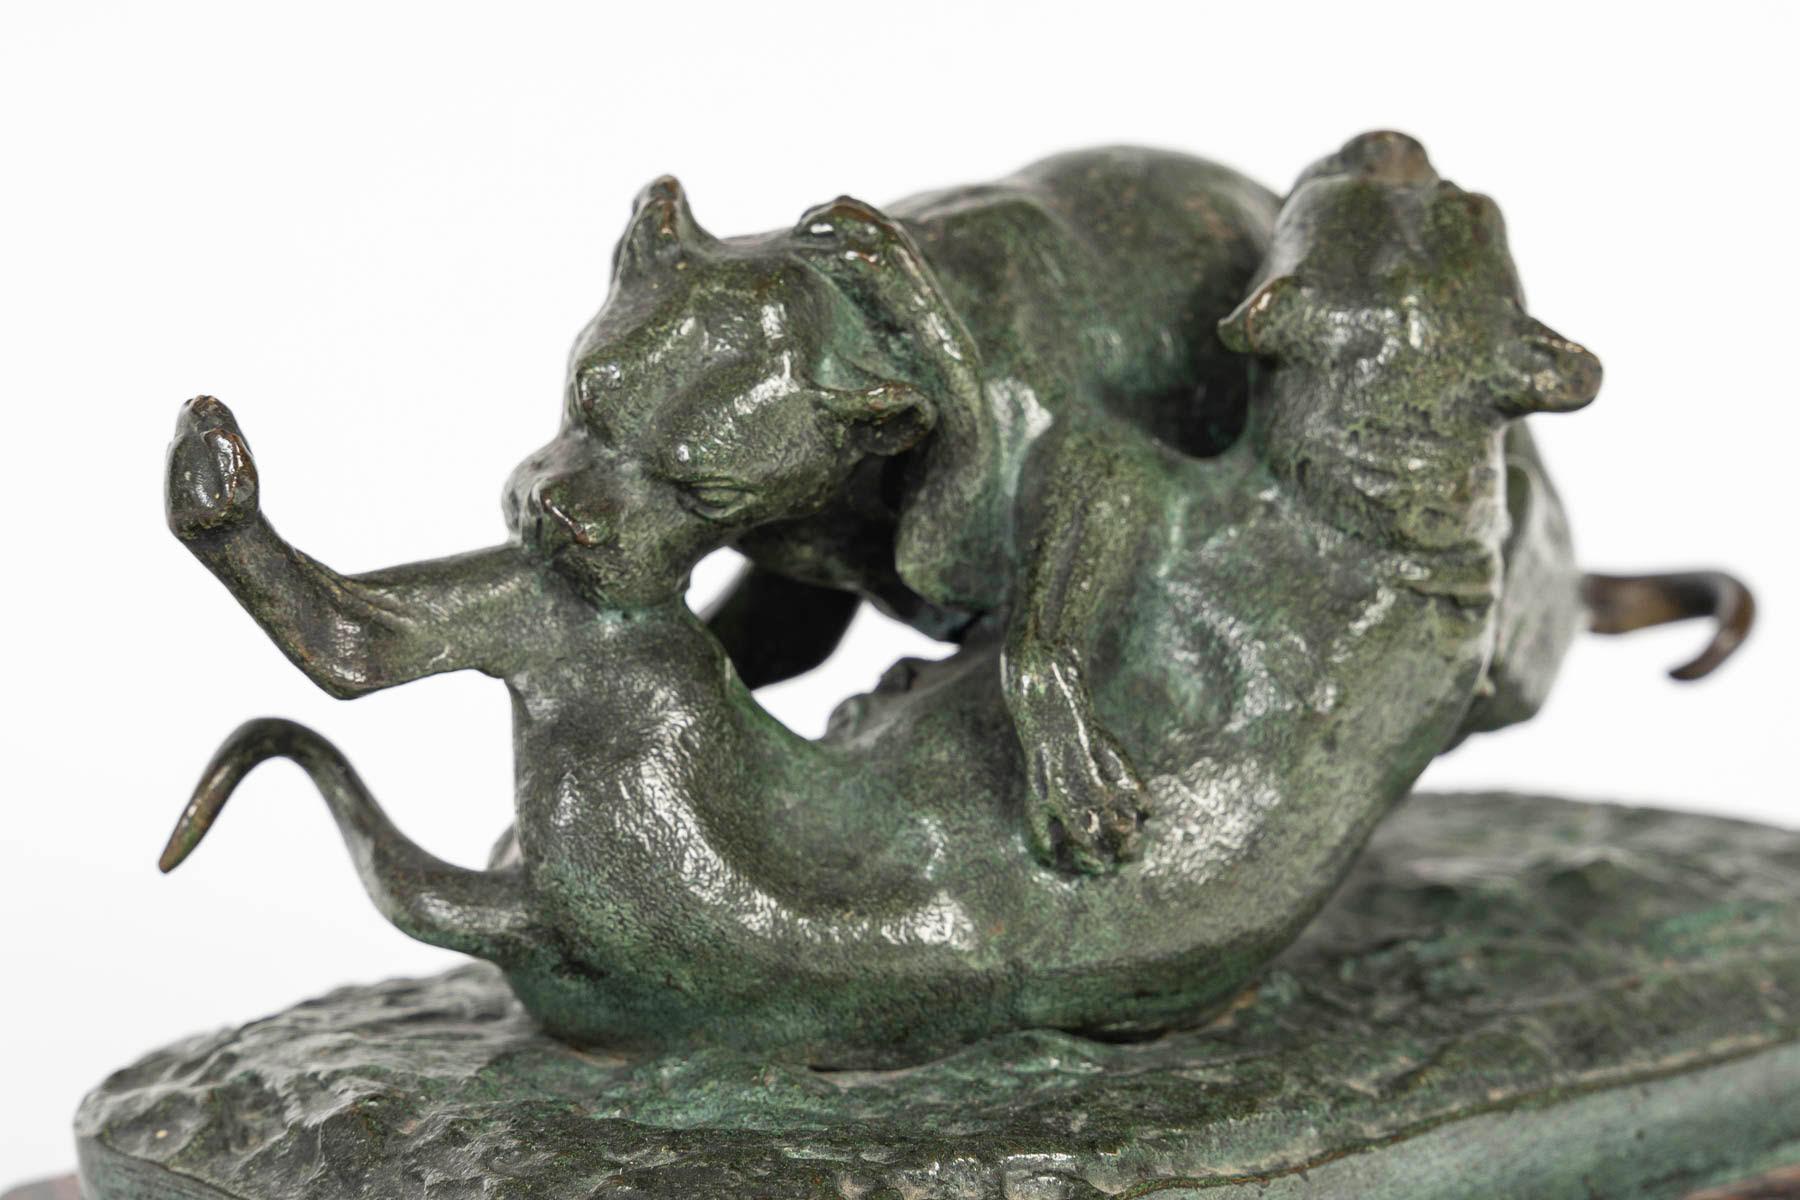 Bronze sculpture of two dogs playing on a marble base, 19th century, Napoleon III period.

A 19th century Napoleon III period bronze sculpture of two dogs playing, green patina bronze, griotte marble base.
H: 11cm, W: 20.5cm, D: 12cm
